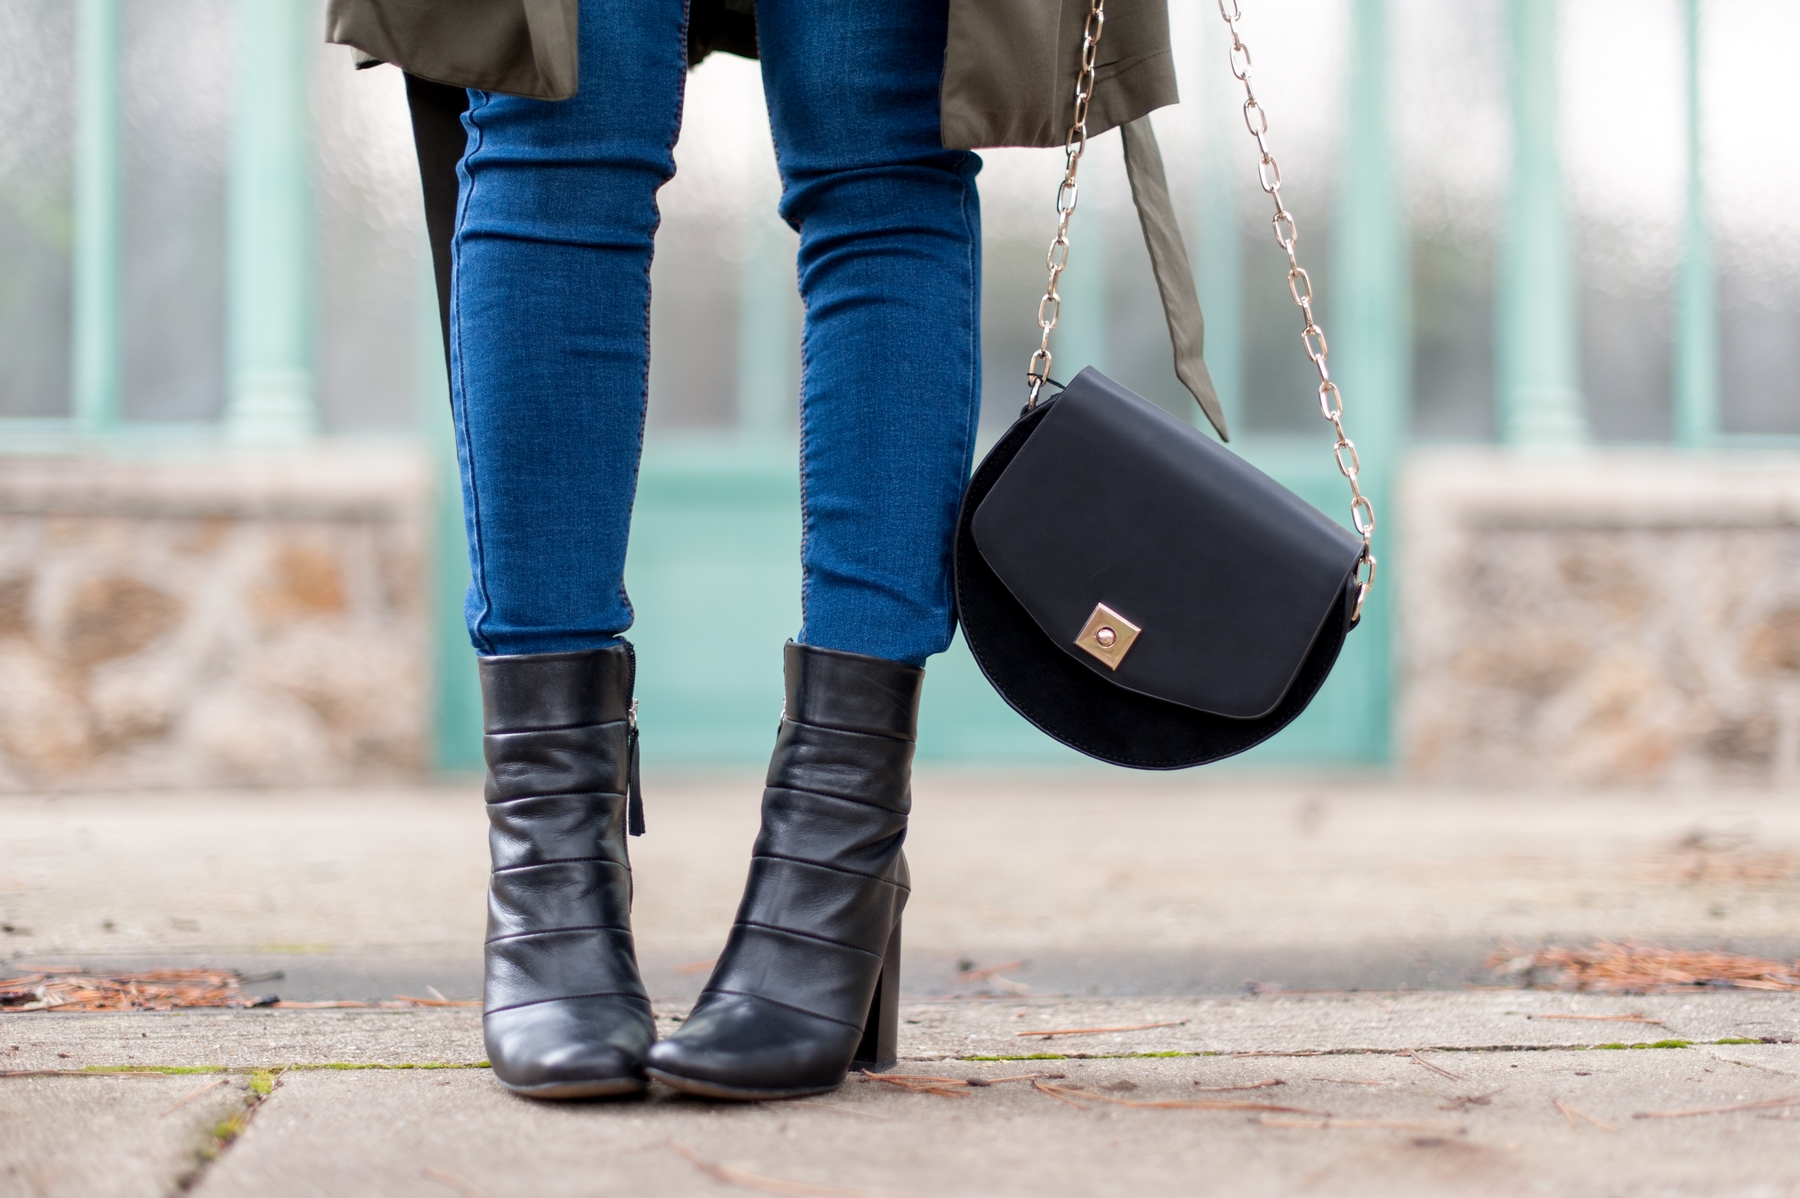 zara leather boot and bag